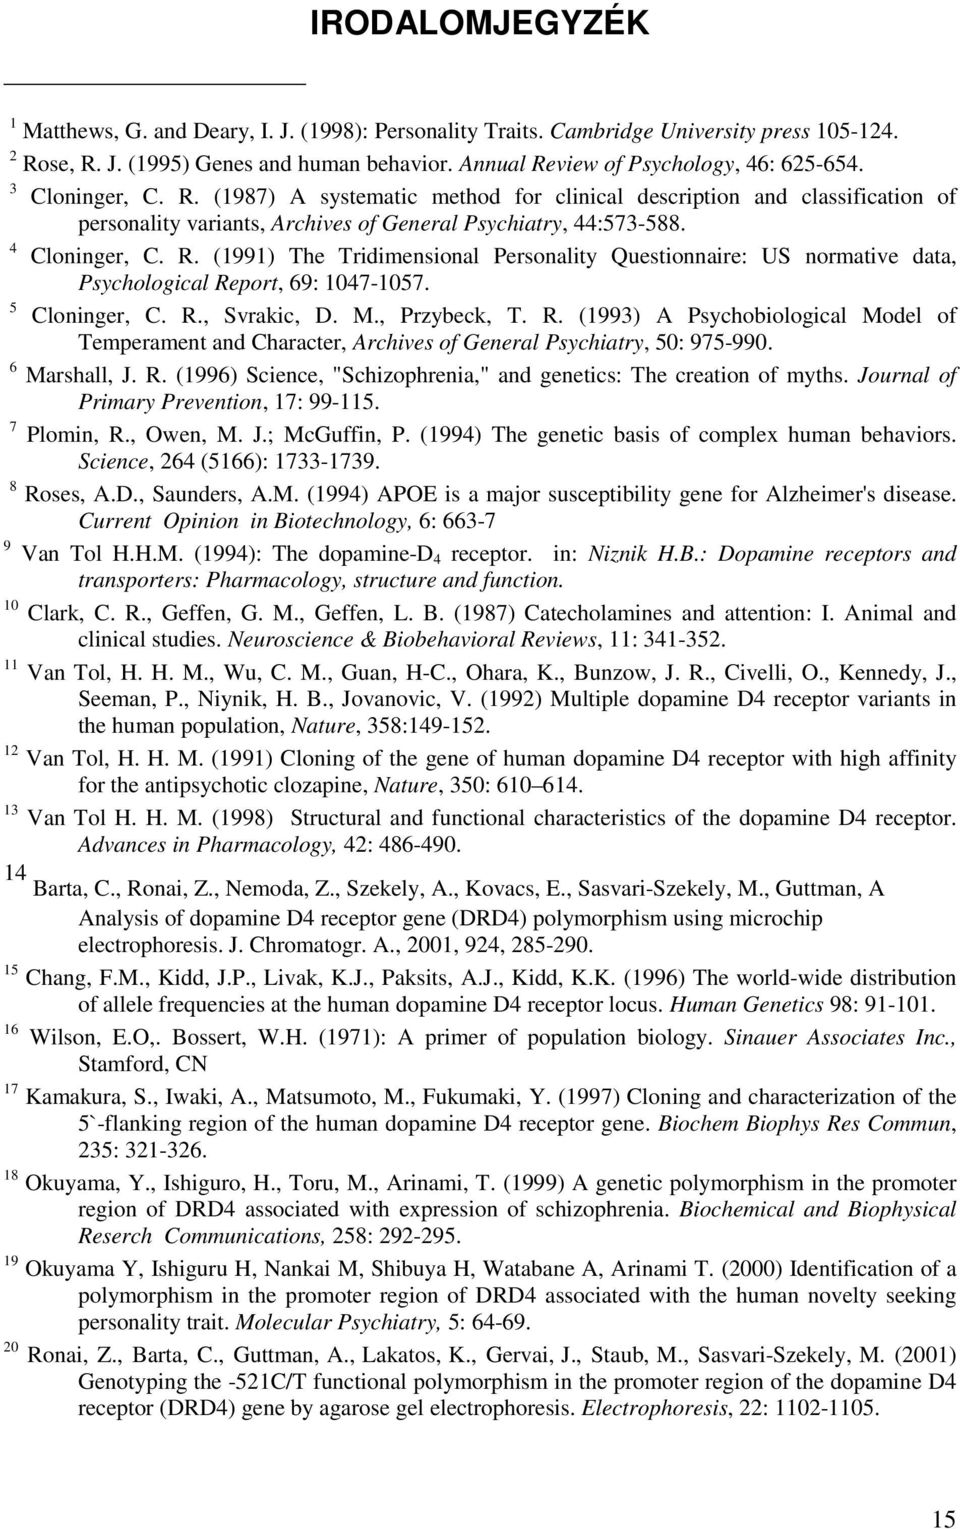 5 Cloninger, C. R., Svrakic, D. M., Przybeck, T. R. (1993) A Psychobiological Model of Temperament and Character, Archives of General Psychiatry, 50: 975-990. 6 Marshall, J. R. (1996) Science, "Schizophrenia," and genetics: The creation of myths.